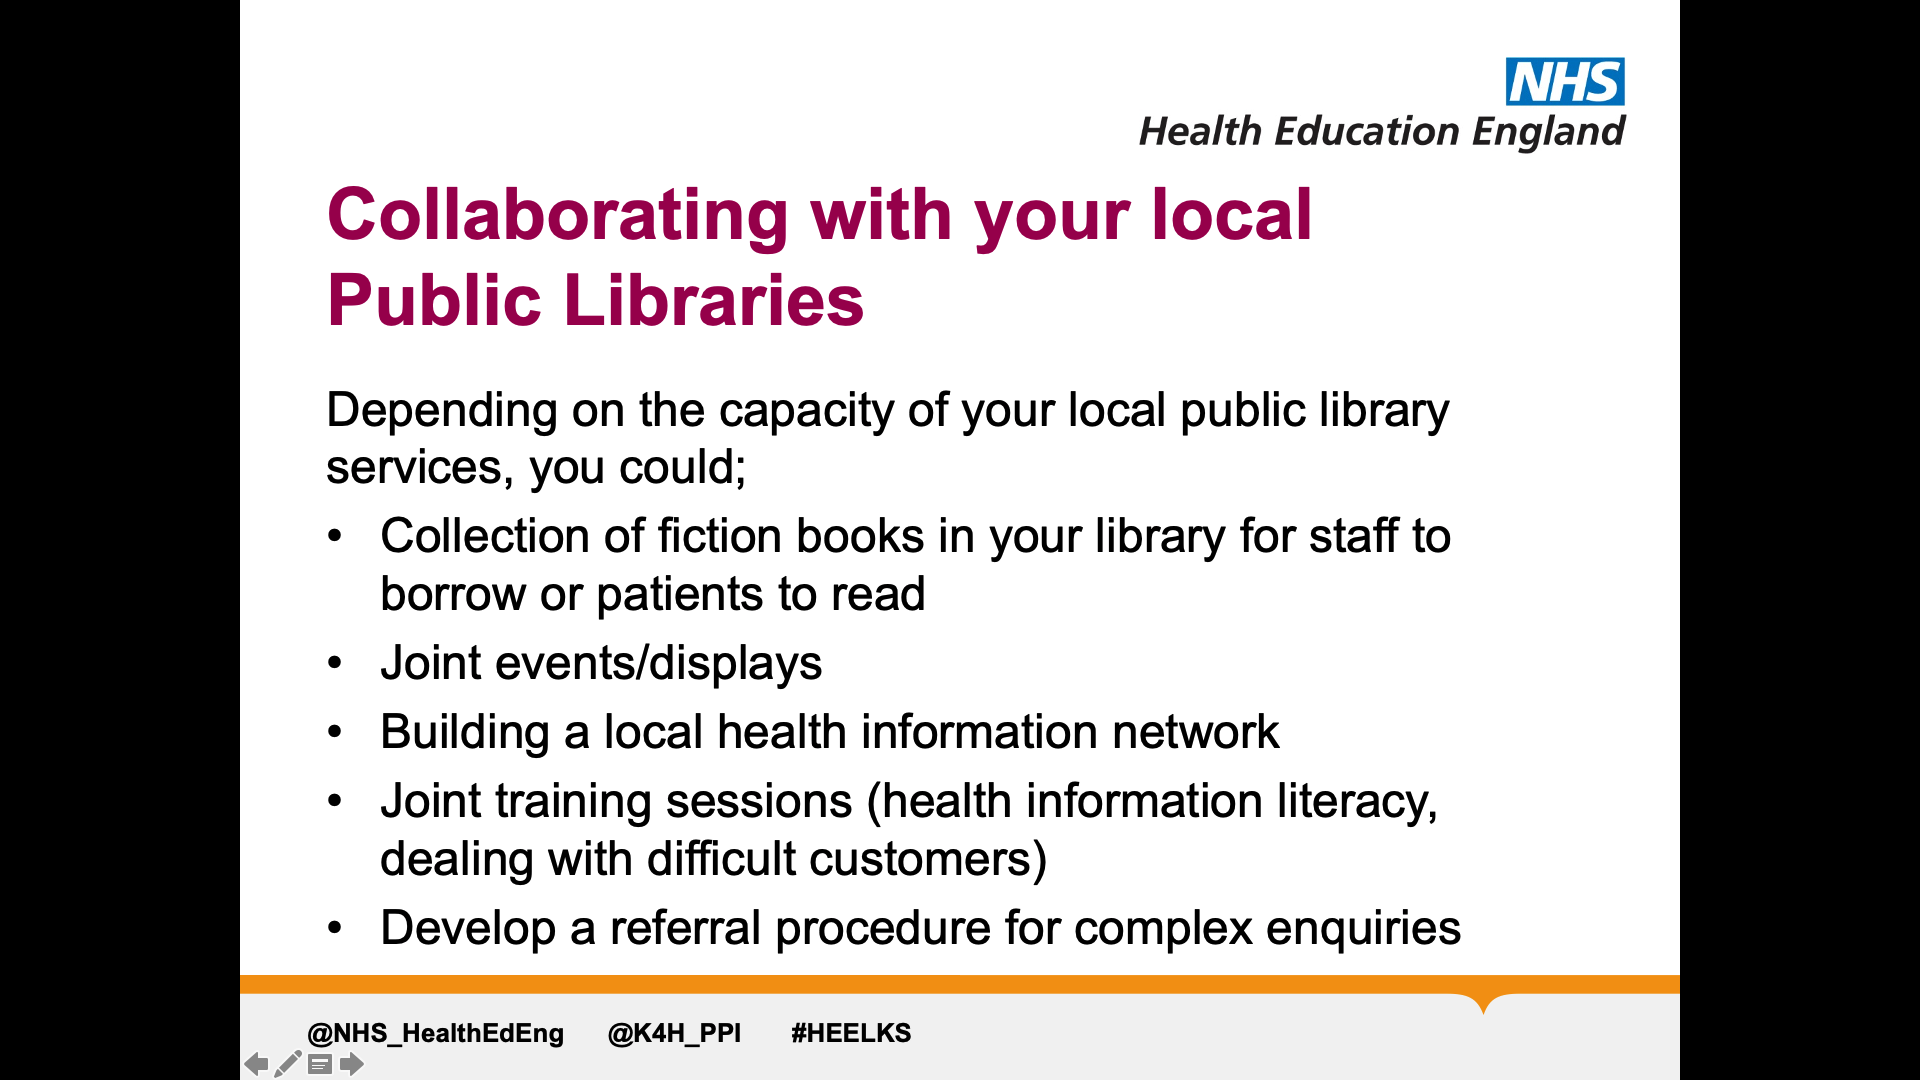 Title: Collaborating with your local Public Libraries. Text on page: Depending on the capacity of your local public library services, you could; Collection of fiction books in your library for staff to borrow or patients to read Joint events/displays Building a local health information network Joint training sessions (health information literacy, dealing with difficult customers), Develop a referral procedure for complex enquiries